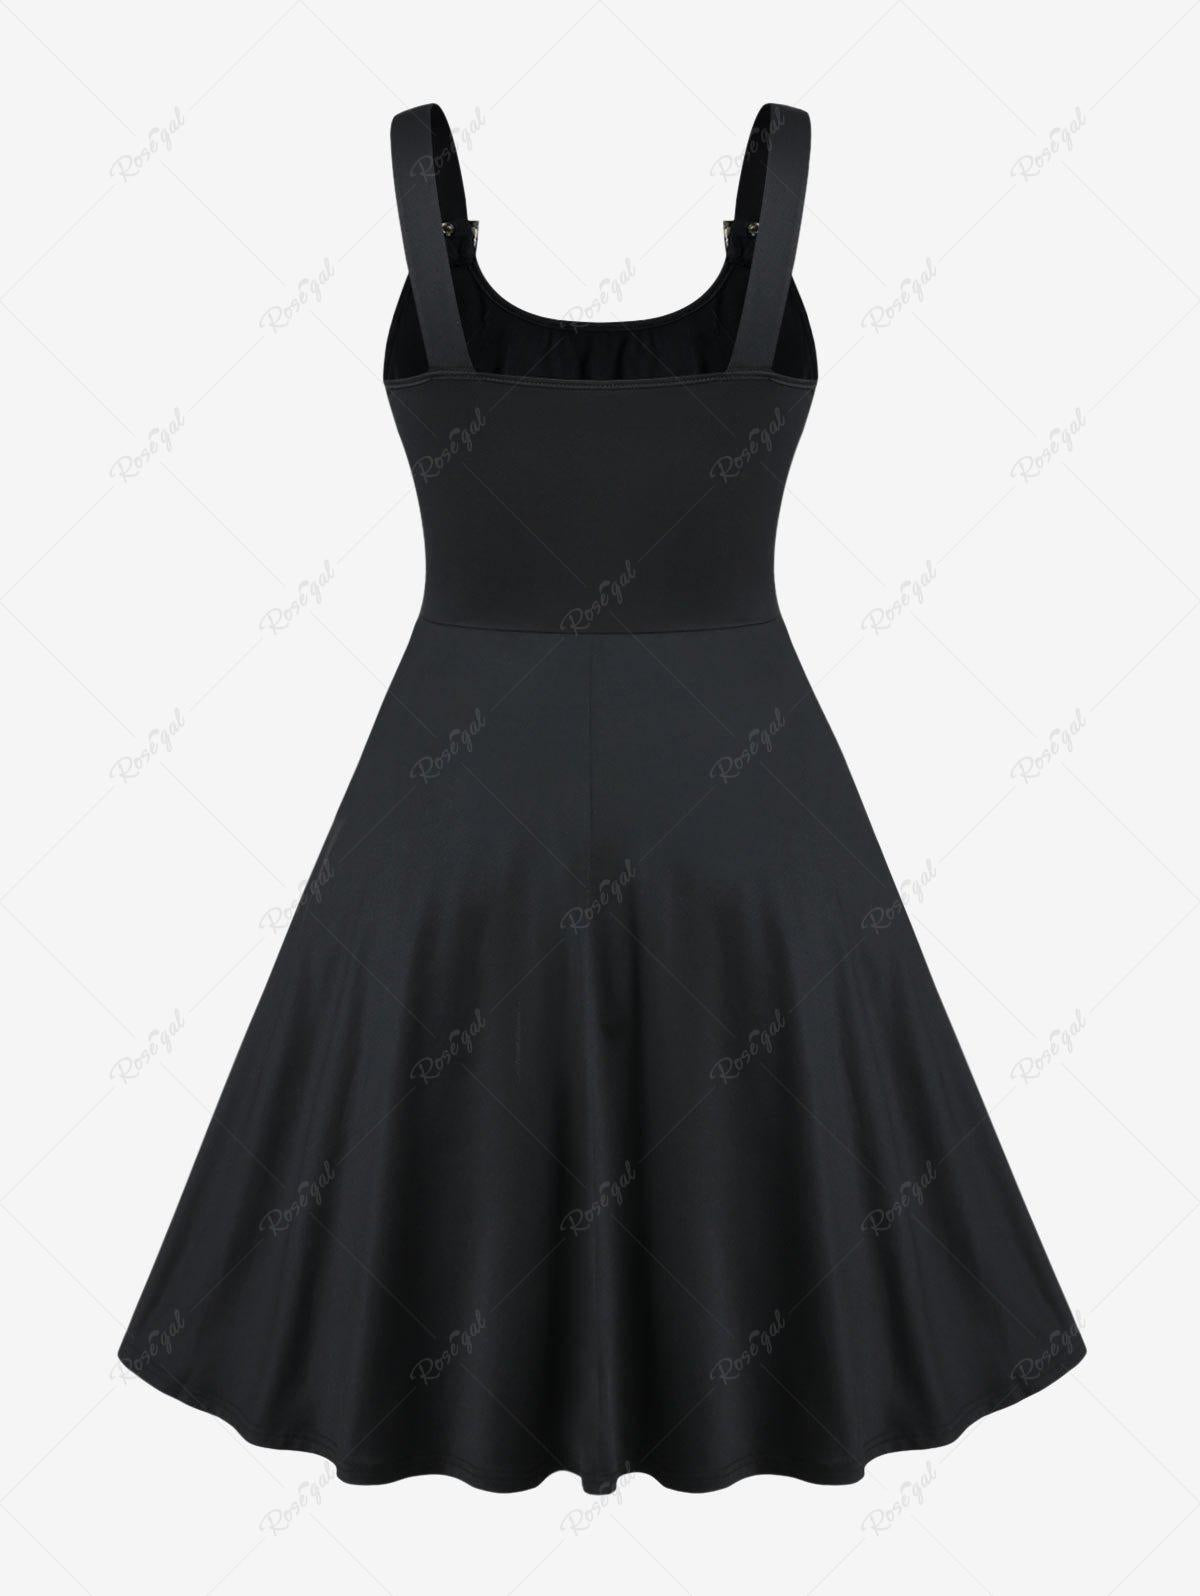 💗Erika Loves💗 Plus Size Lace Up Buckles A Line Sleeveless Gothic Dress